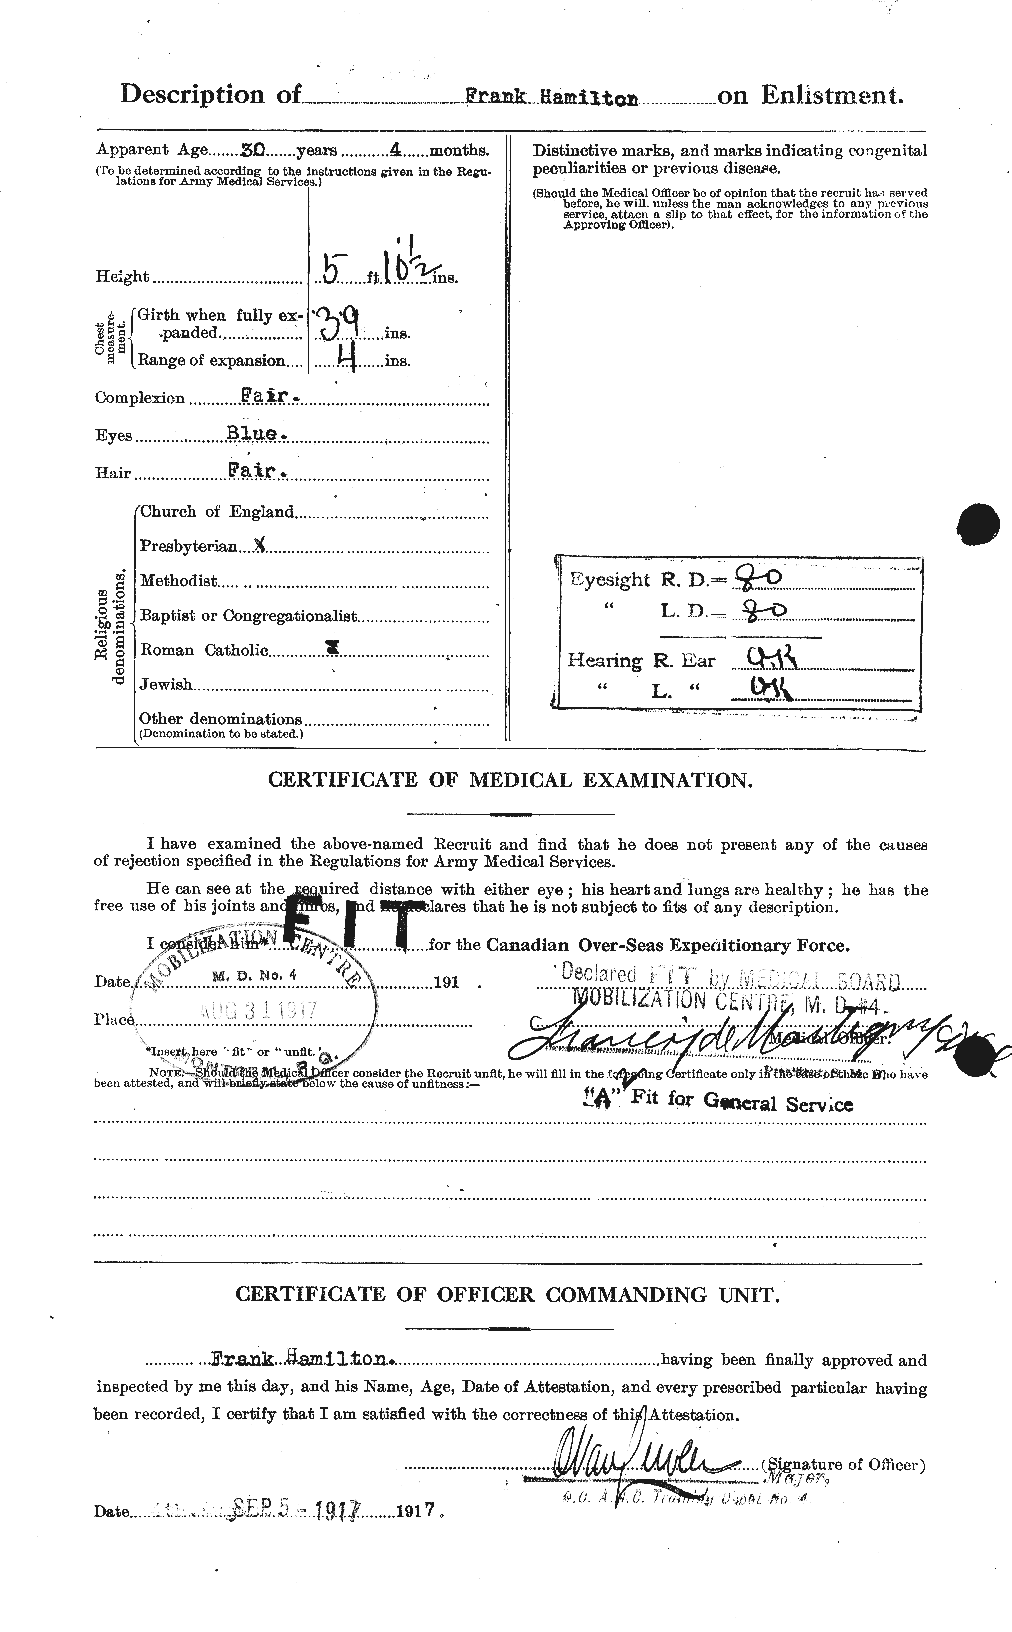 Personnel Records of the First World War - CEF 372382b